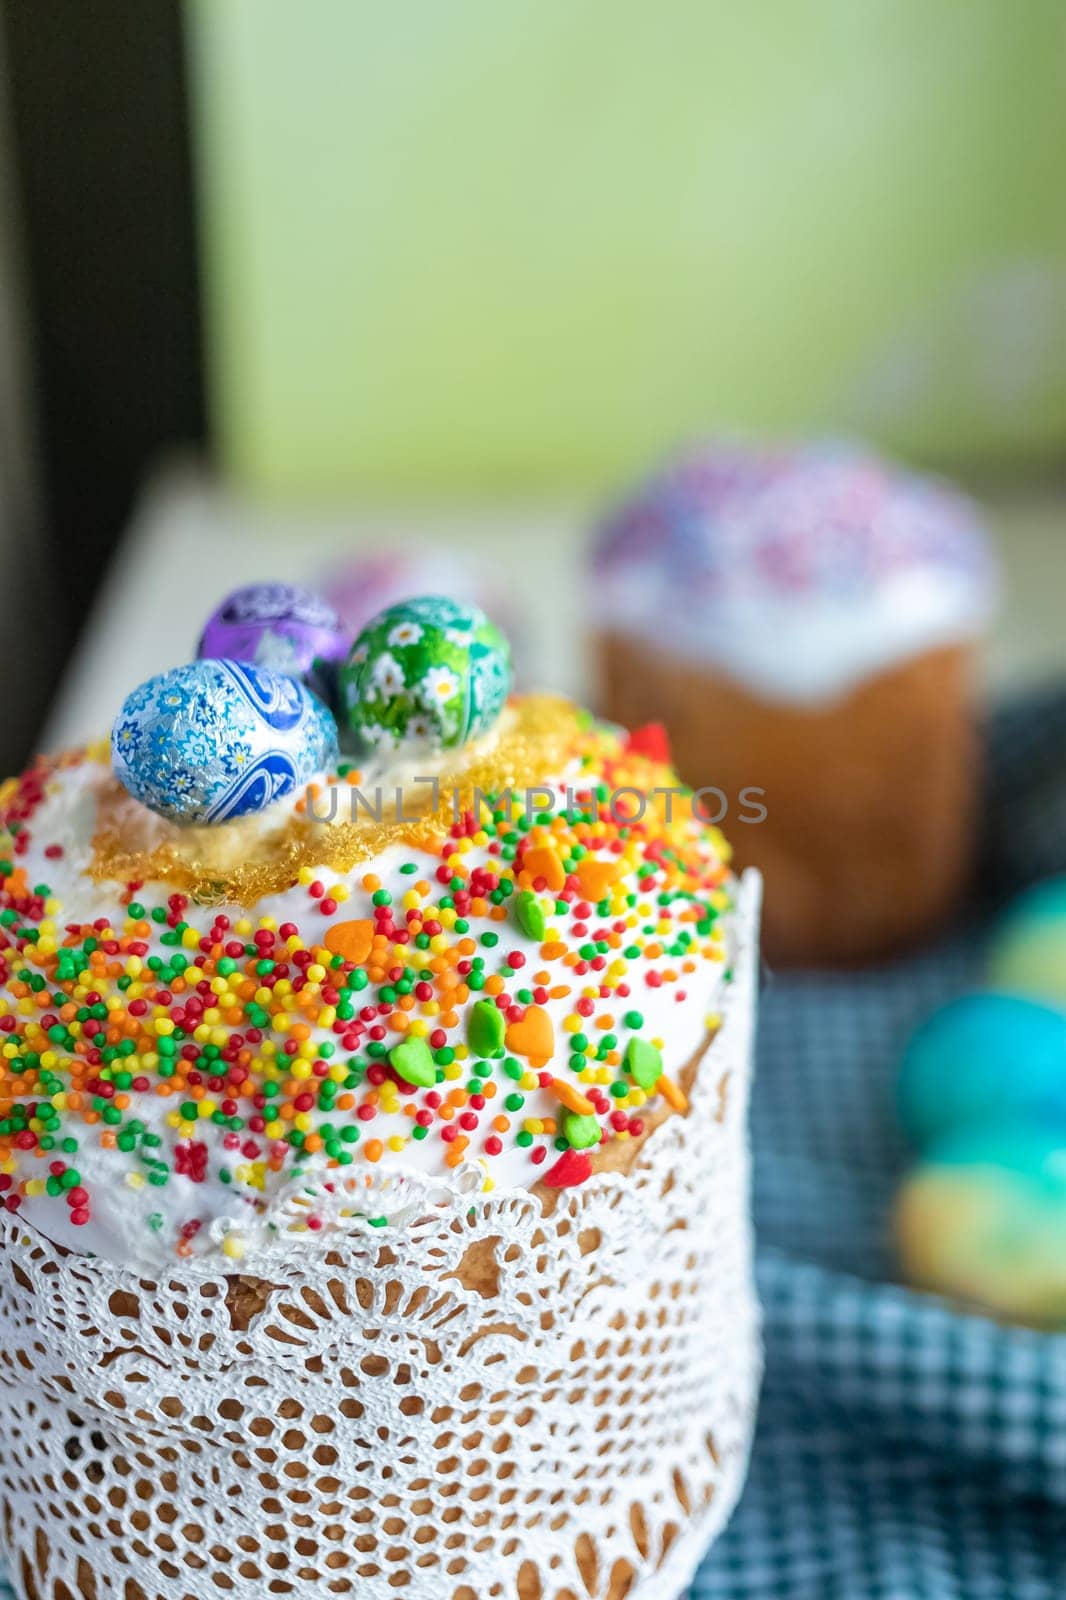 Traditional Easter cake with glace icing and Easter eggs on wooden background with willow twigs. Spring season. Orthodox Easter. Close up, selective focus. by Anyatachka